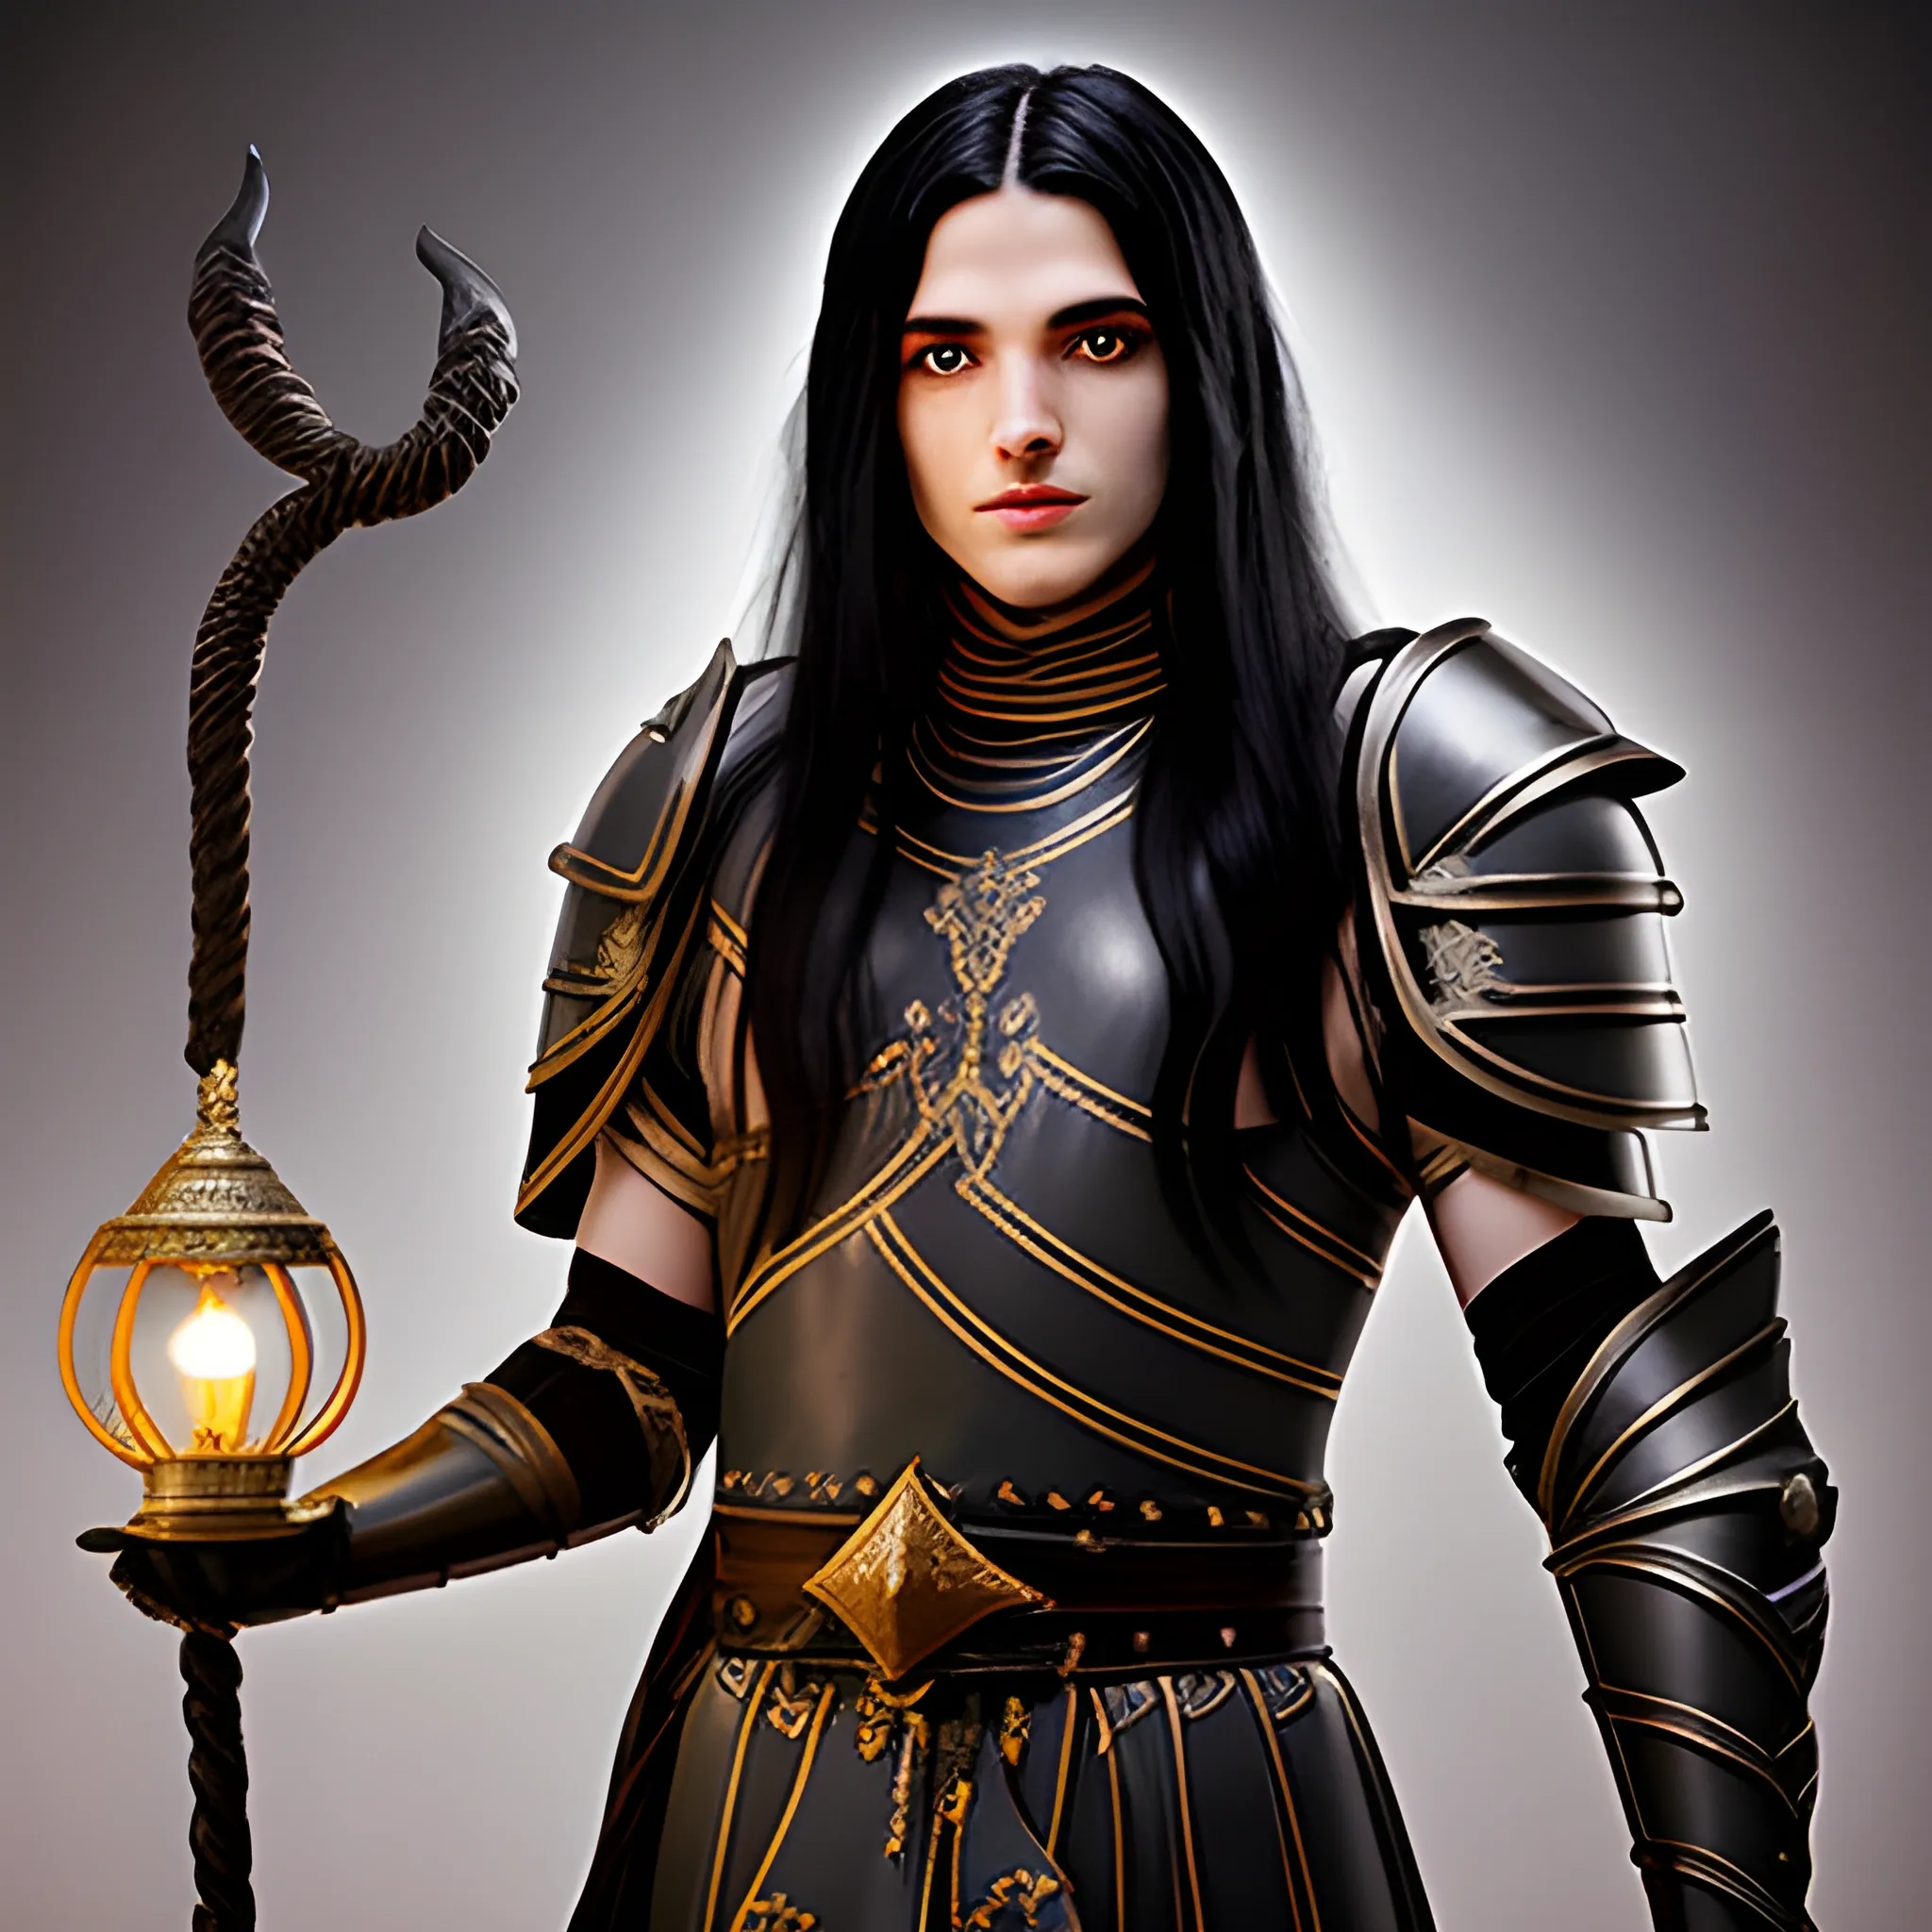 long black haired, male, aasimar, wearing leather armor, holding a djinni lamp
